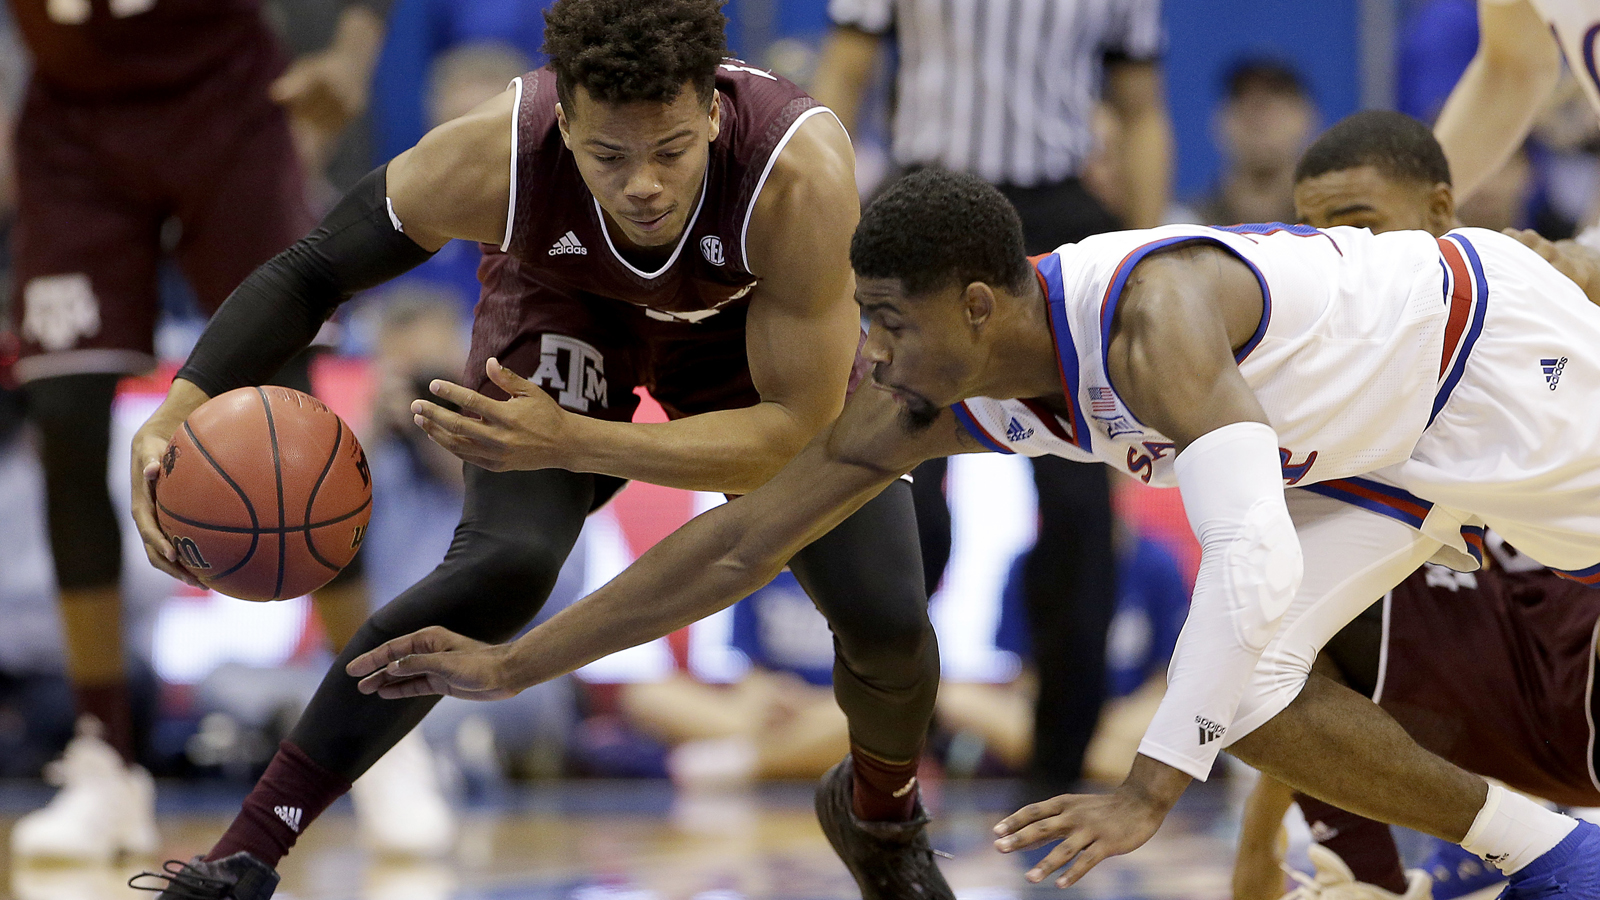 Jayhawks bounce back with 79-68 victory over Aggies